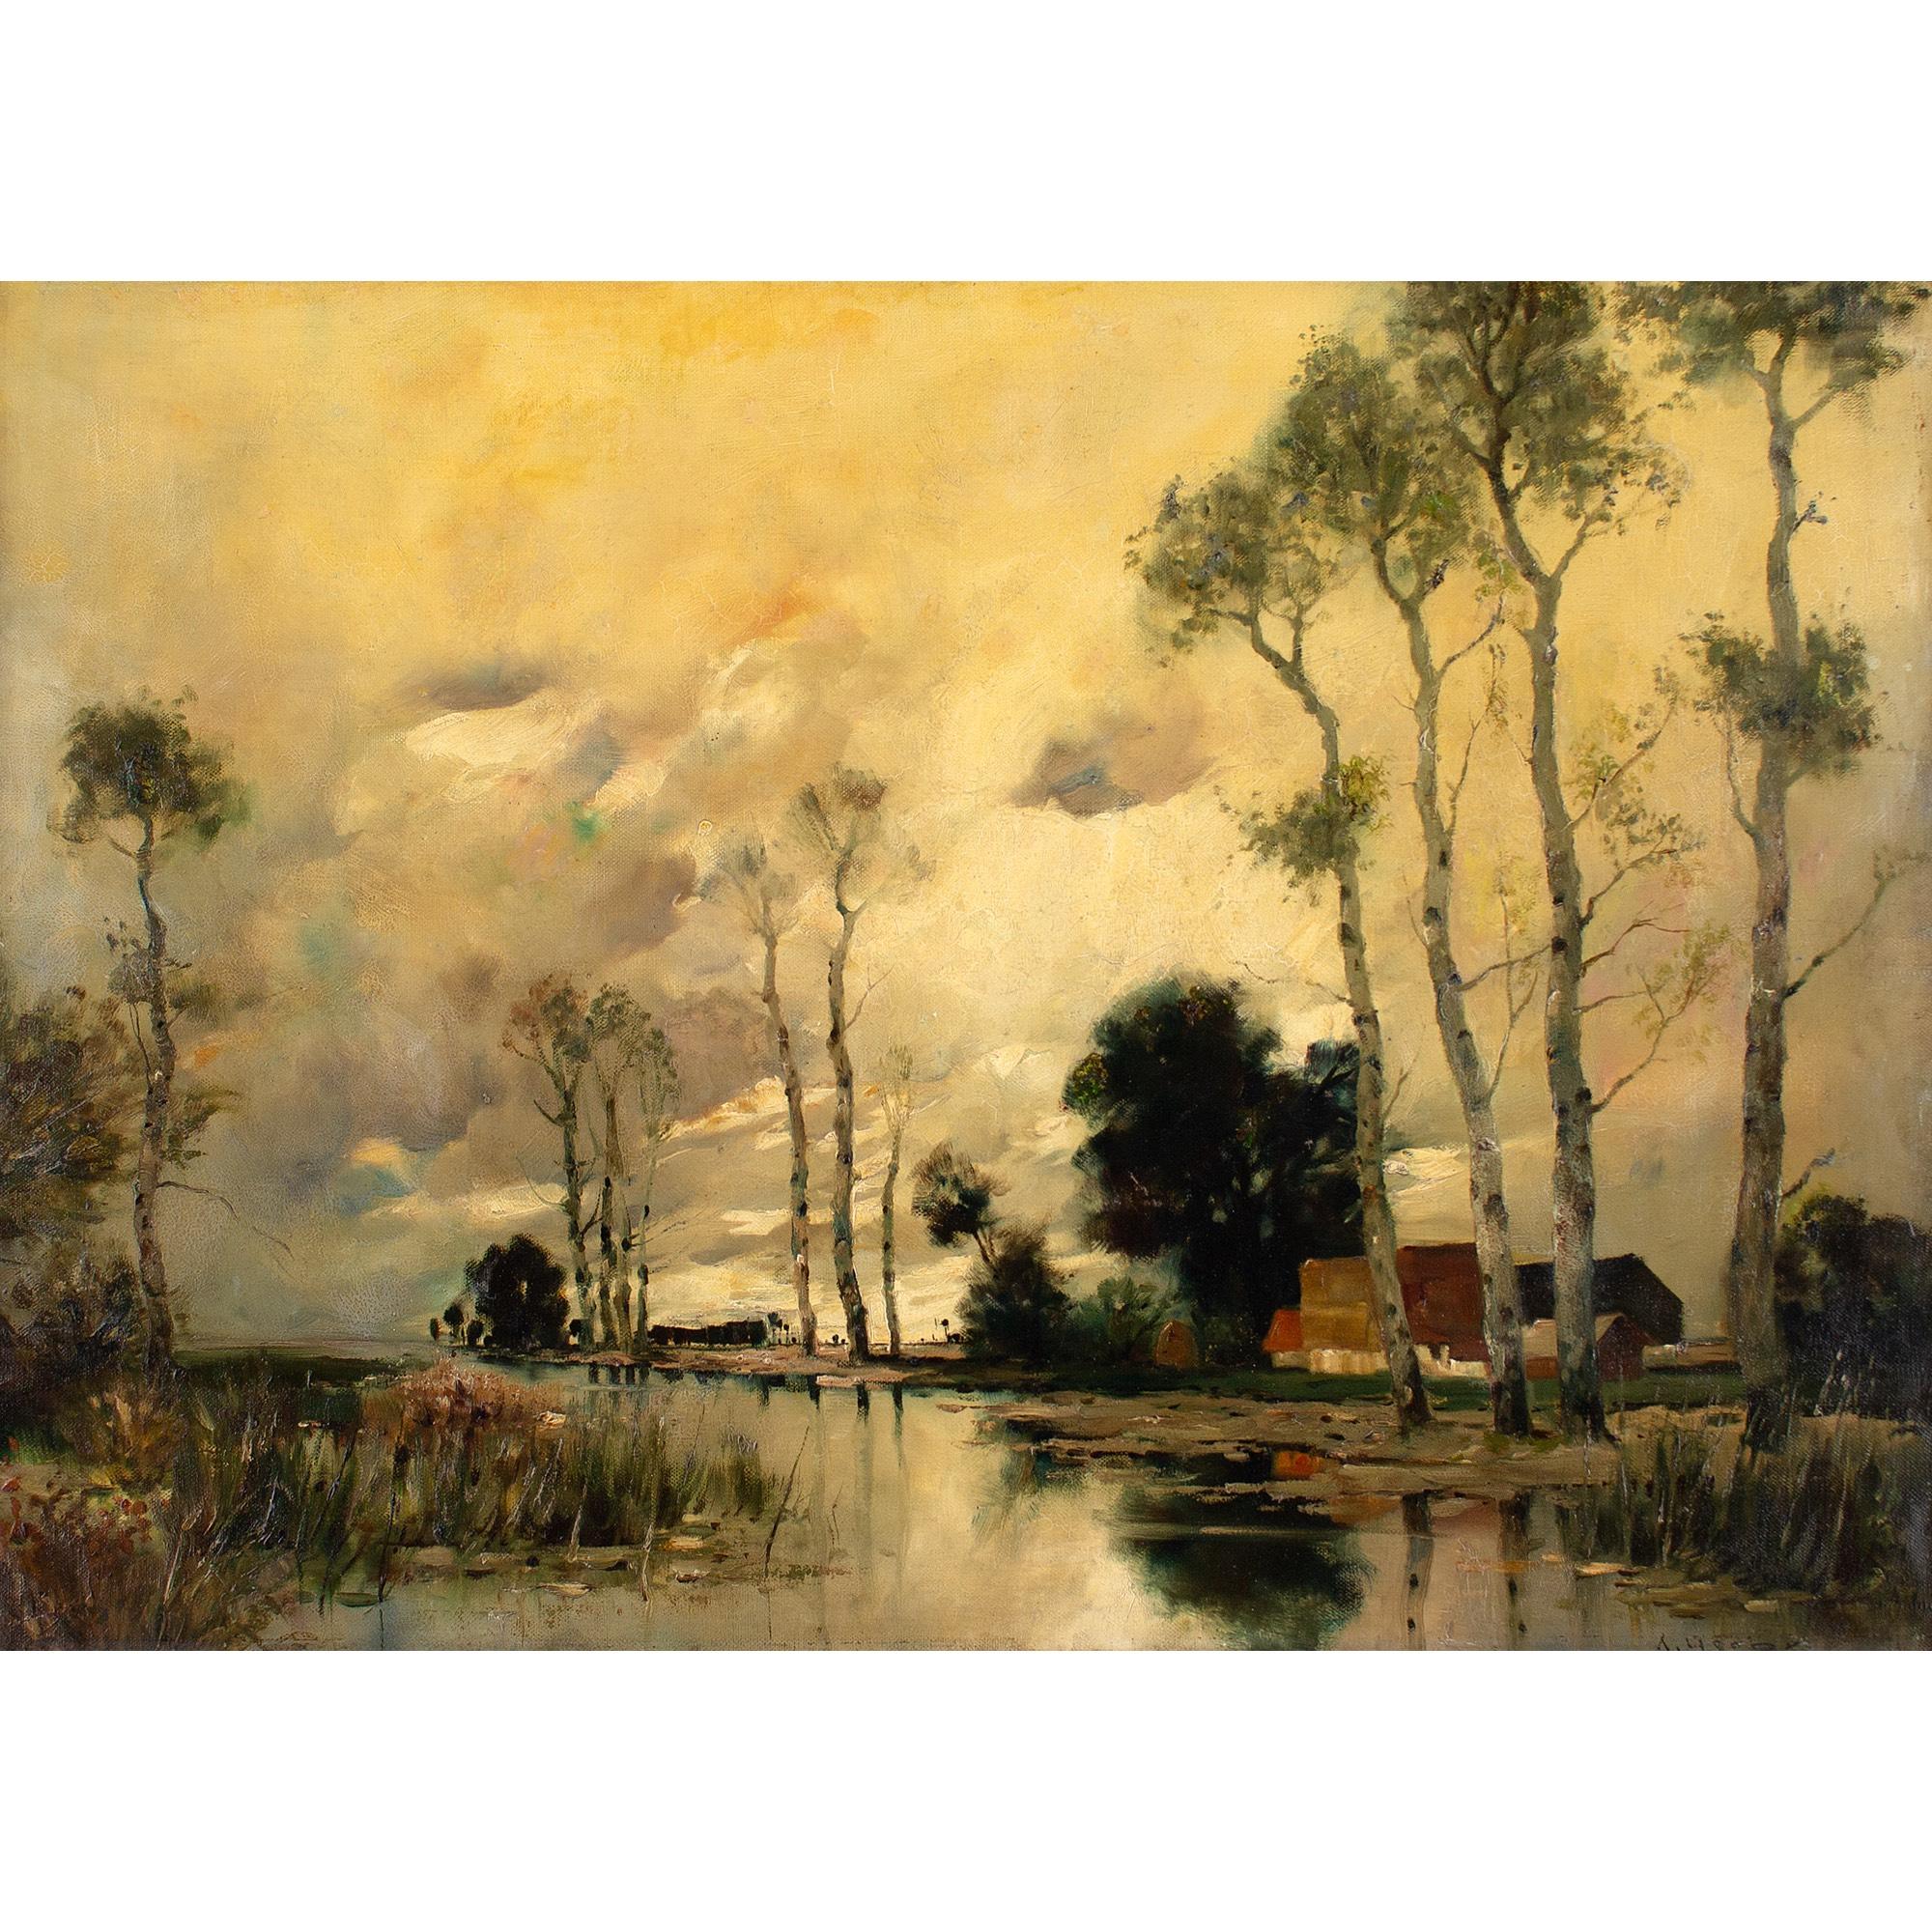 This early 20th-century oil painting by A Herbe depicts a river landscape under turbulent evening sky.

Overhead, the dense passing clouds are punctuated by several limber birch trees. Following days of rain, the river bulges on this overcast day in